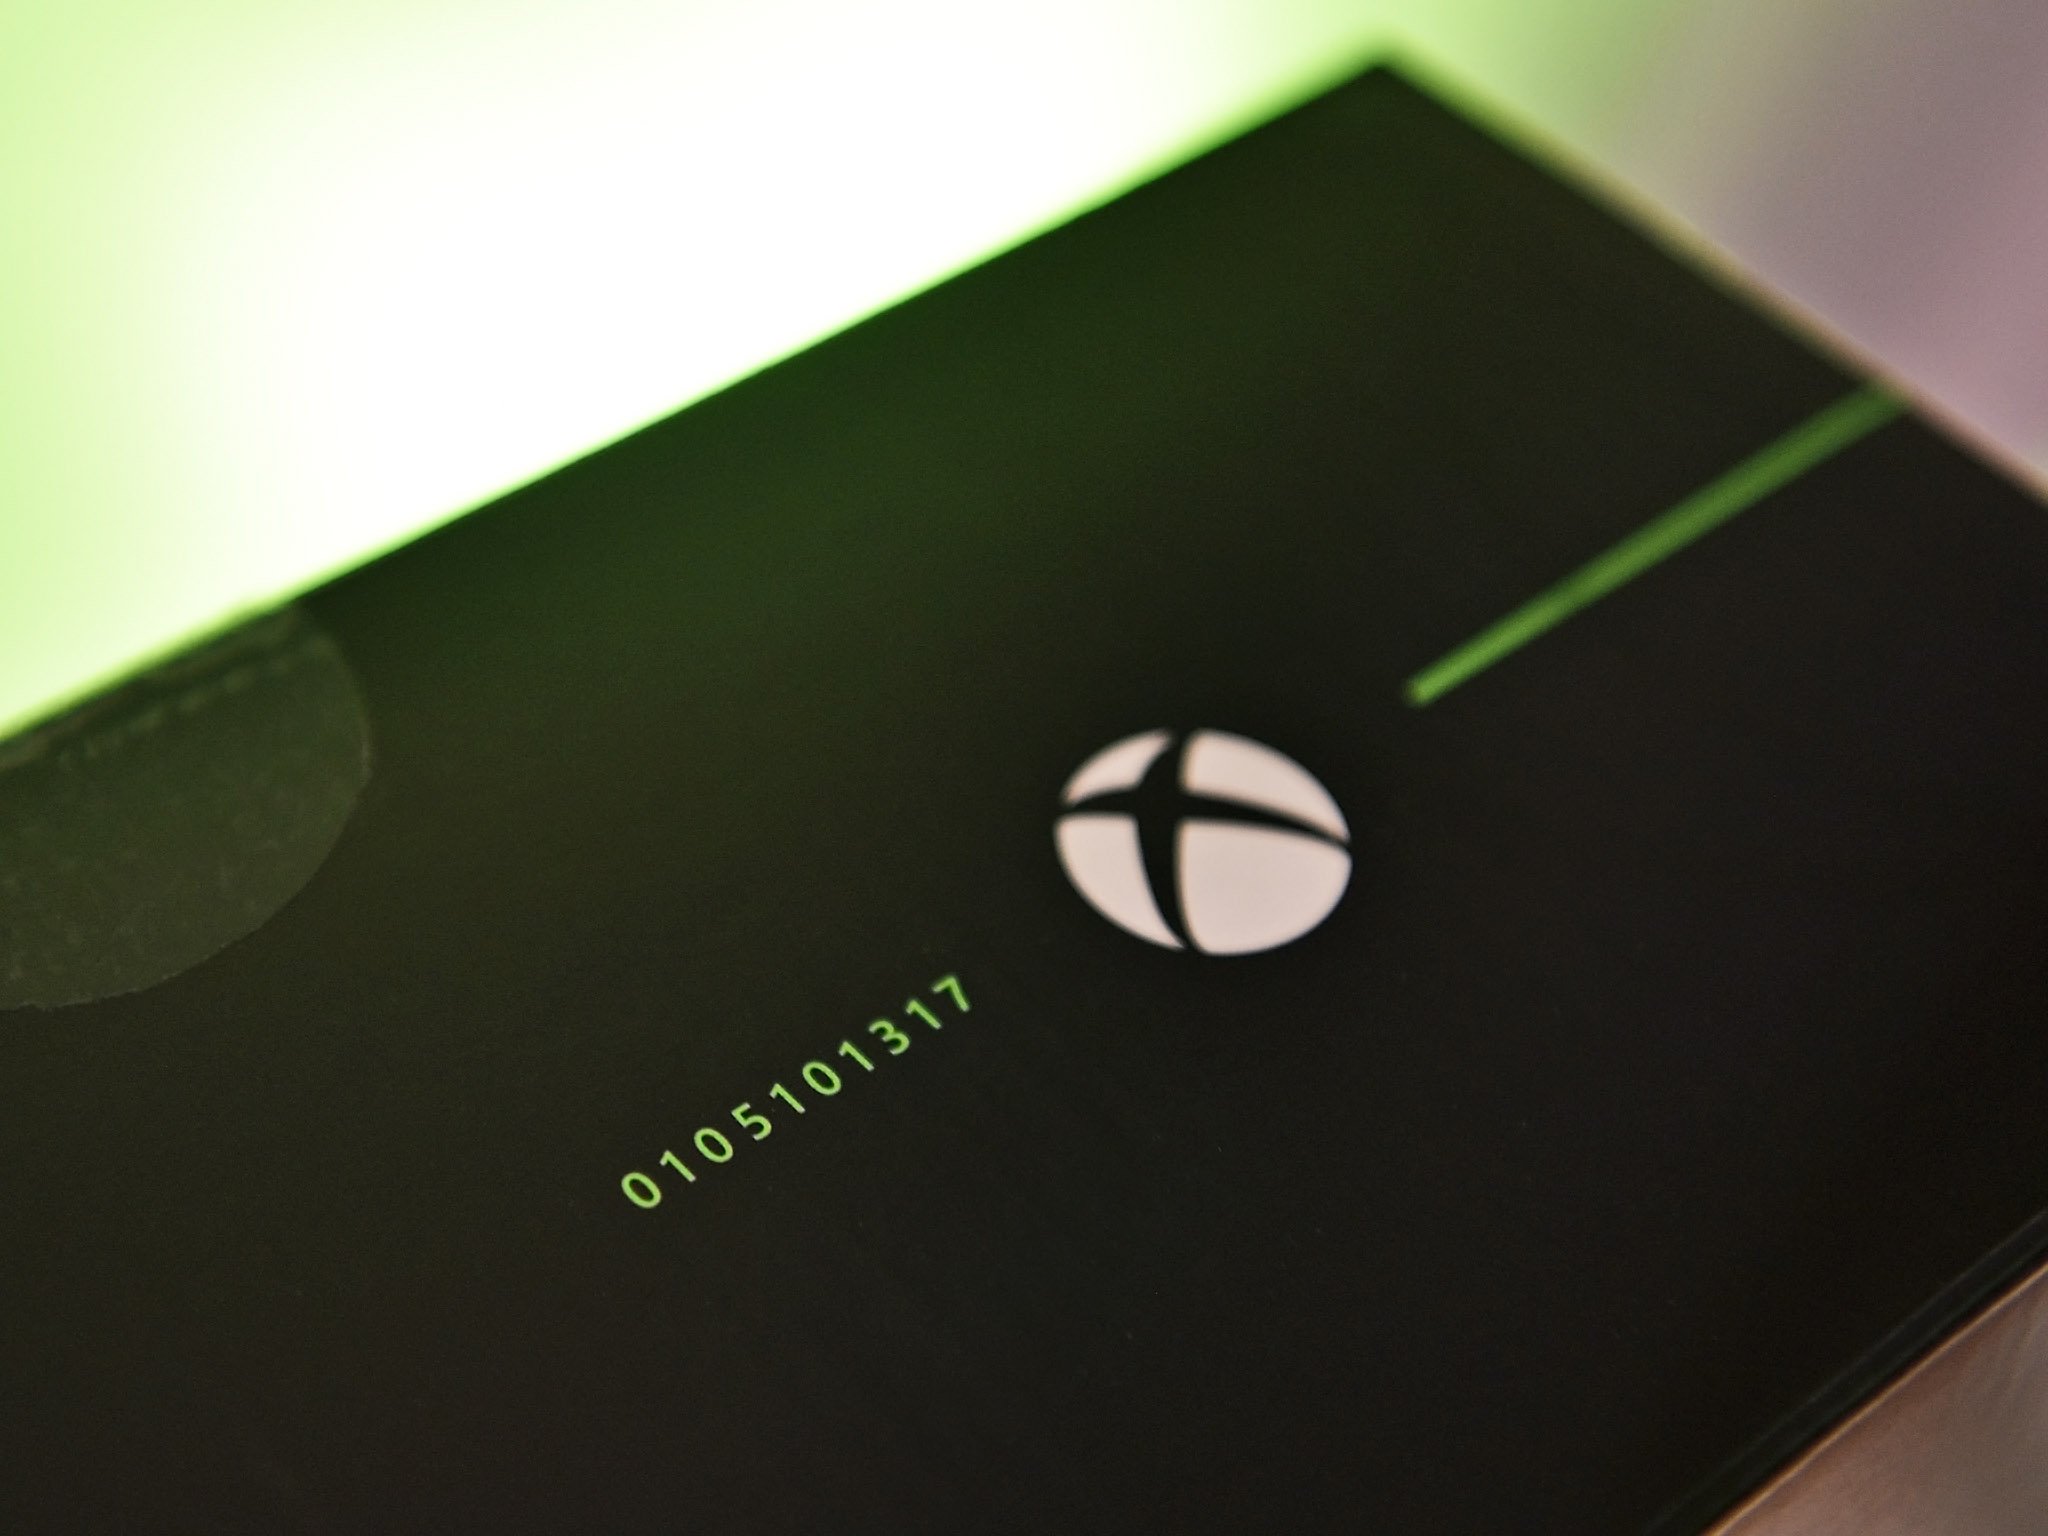 Xbox Live grows to 59 million active users